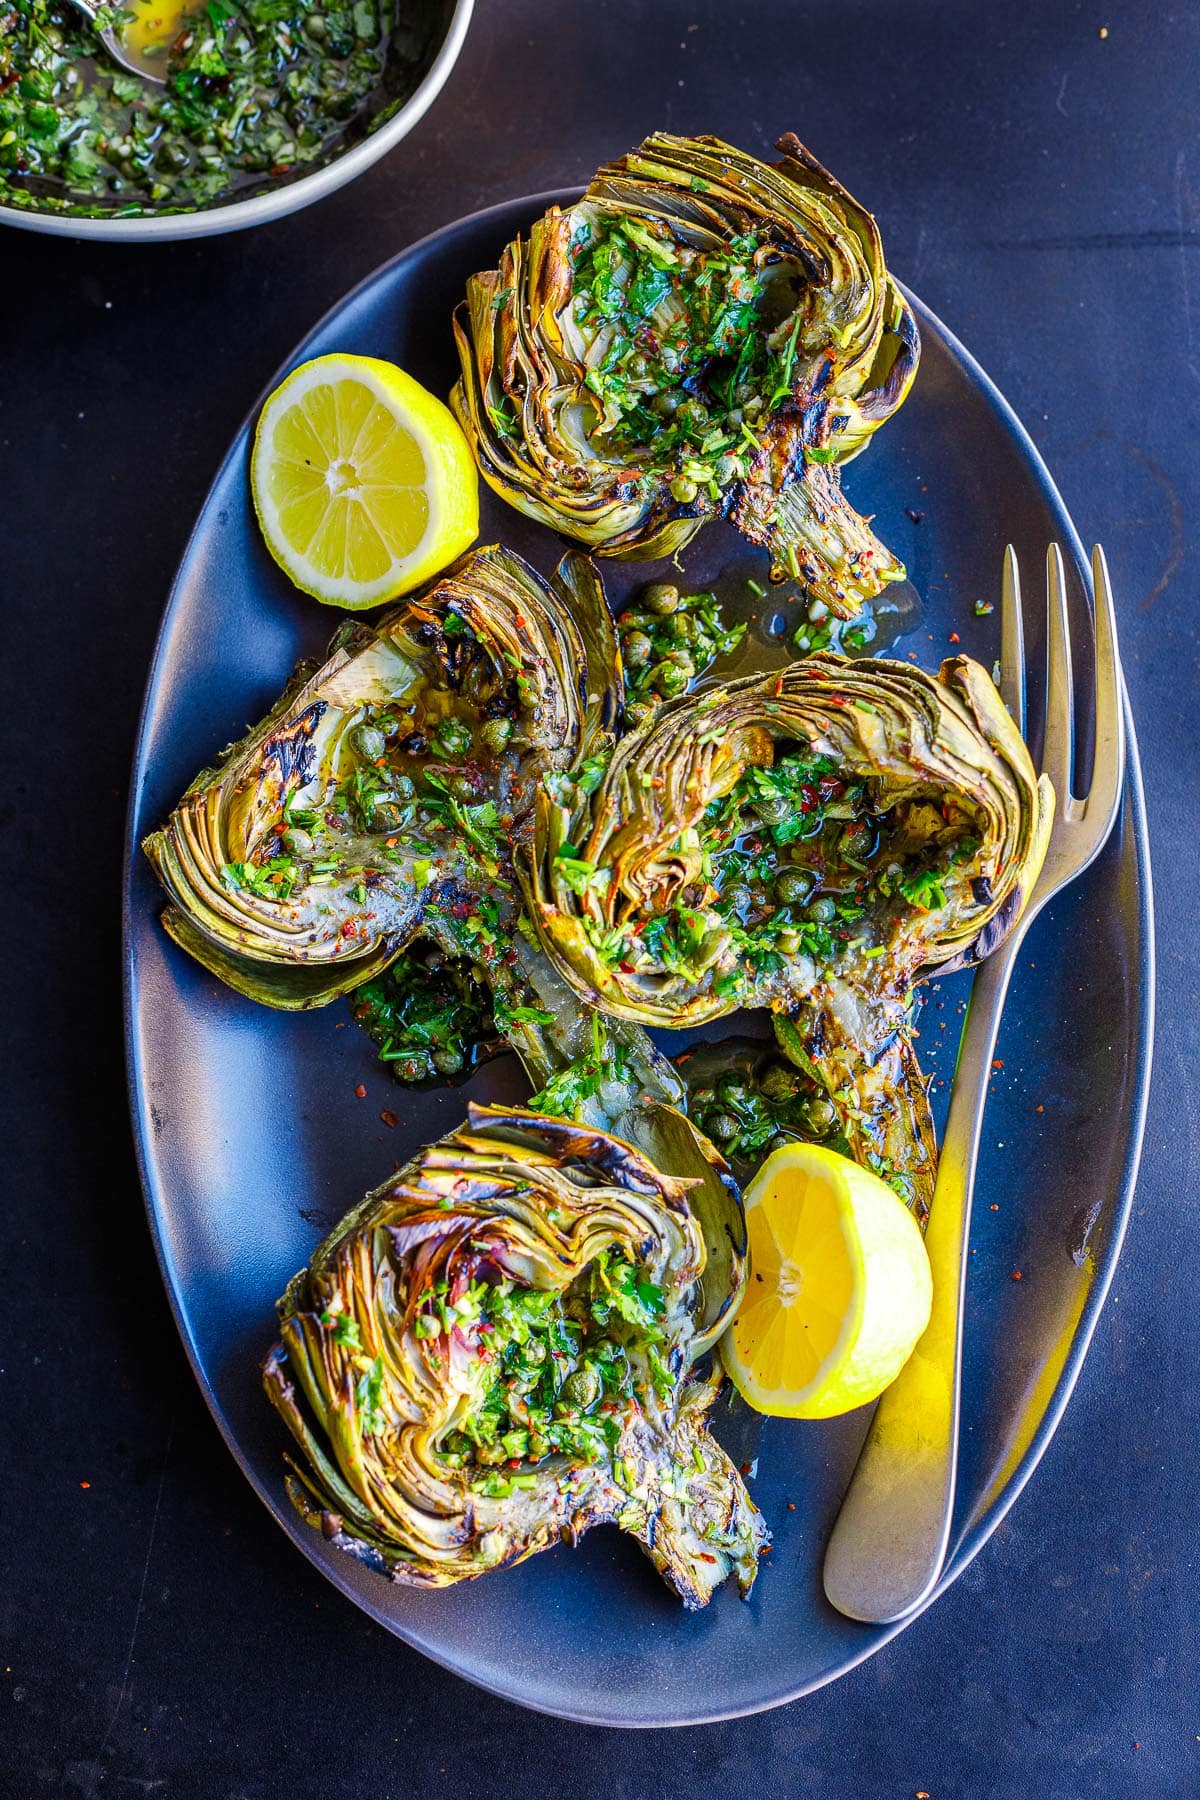 serving plate with grilled artichokes, drizzled with Italian salsa verde, served with lemons.